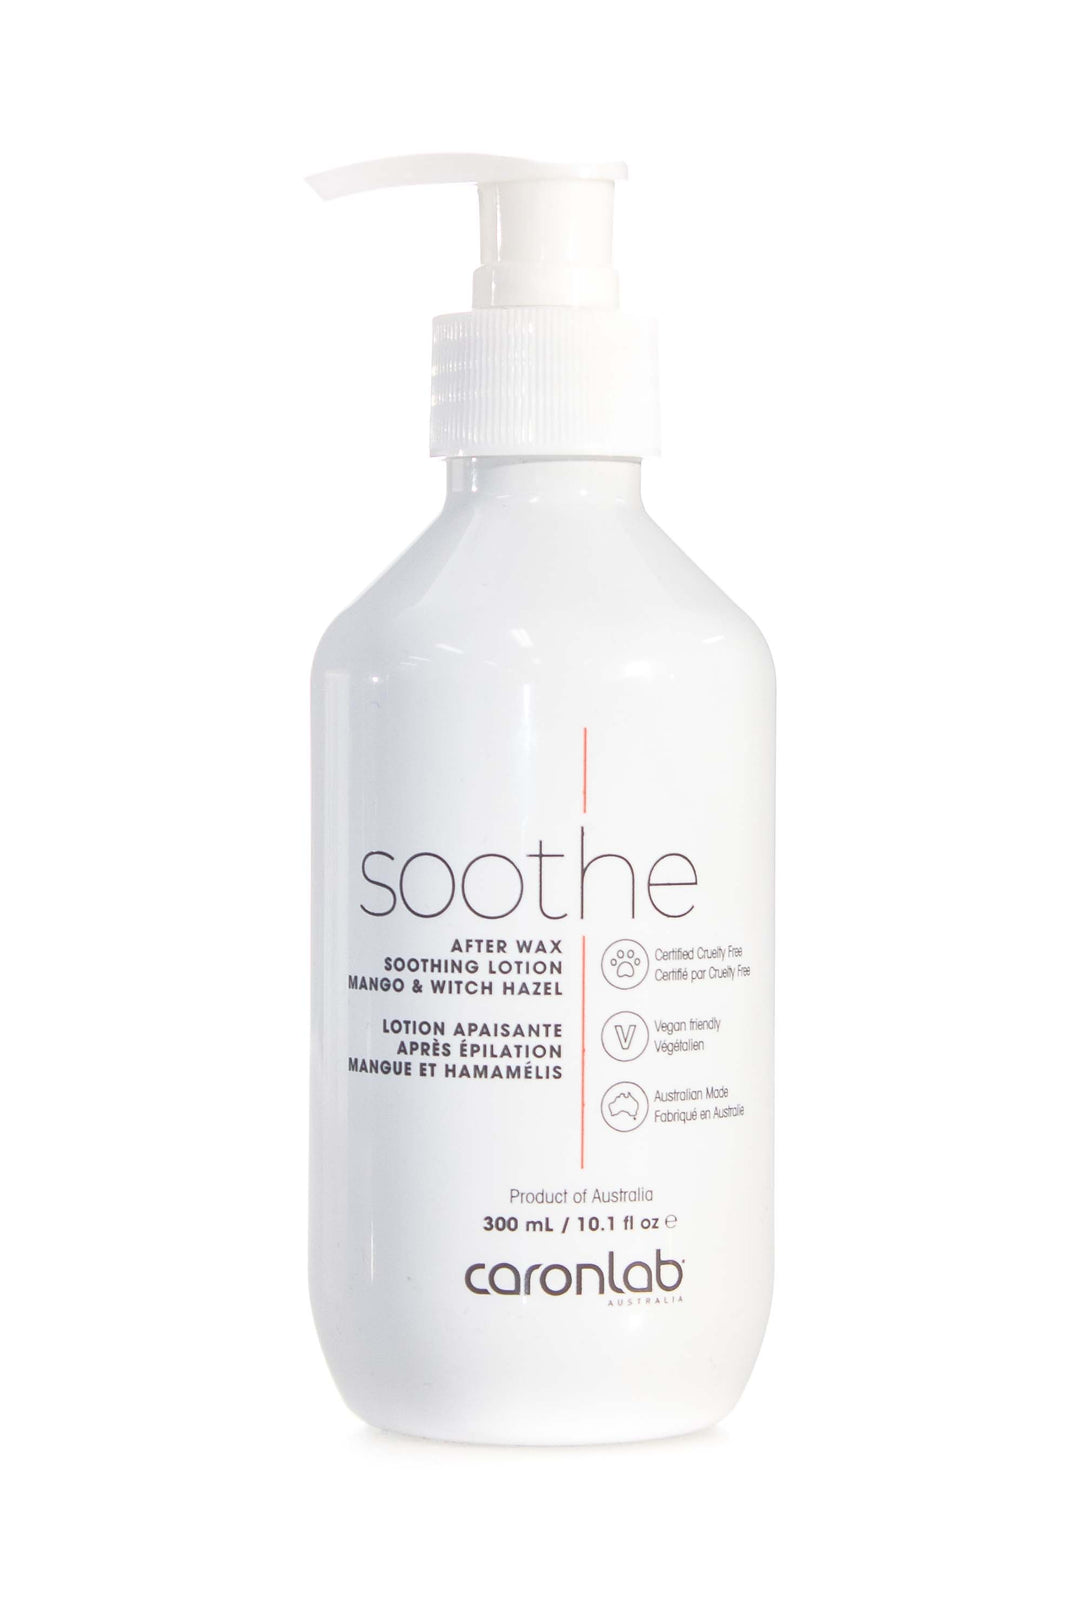 CARONLAB After Wax Soothing Lotion  - Mango & Witch Hazel  |  Various Sizes